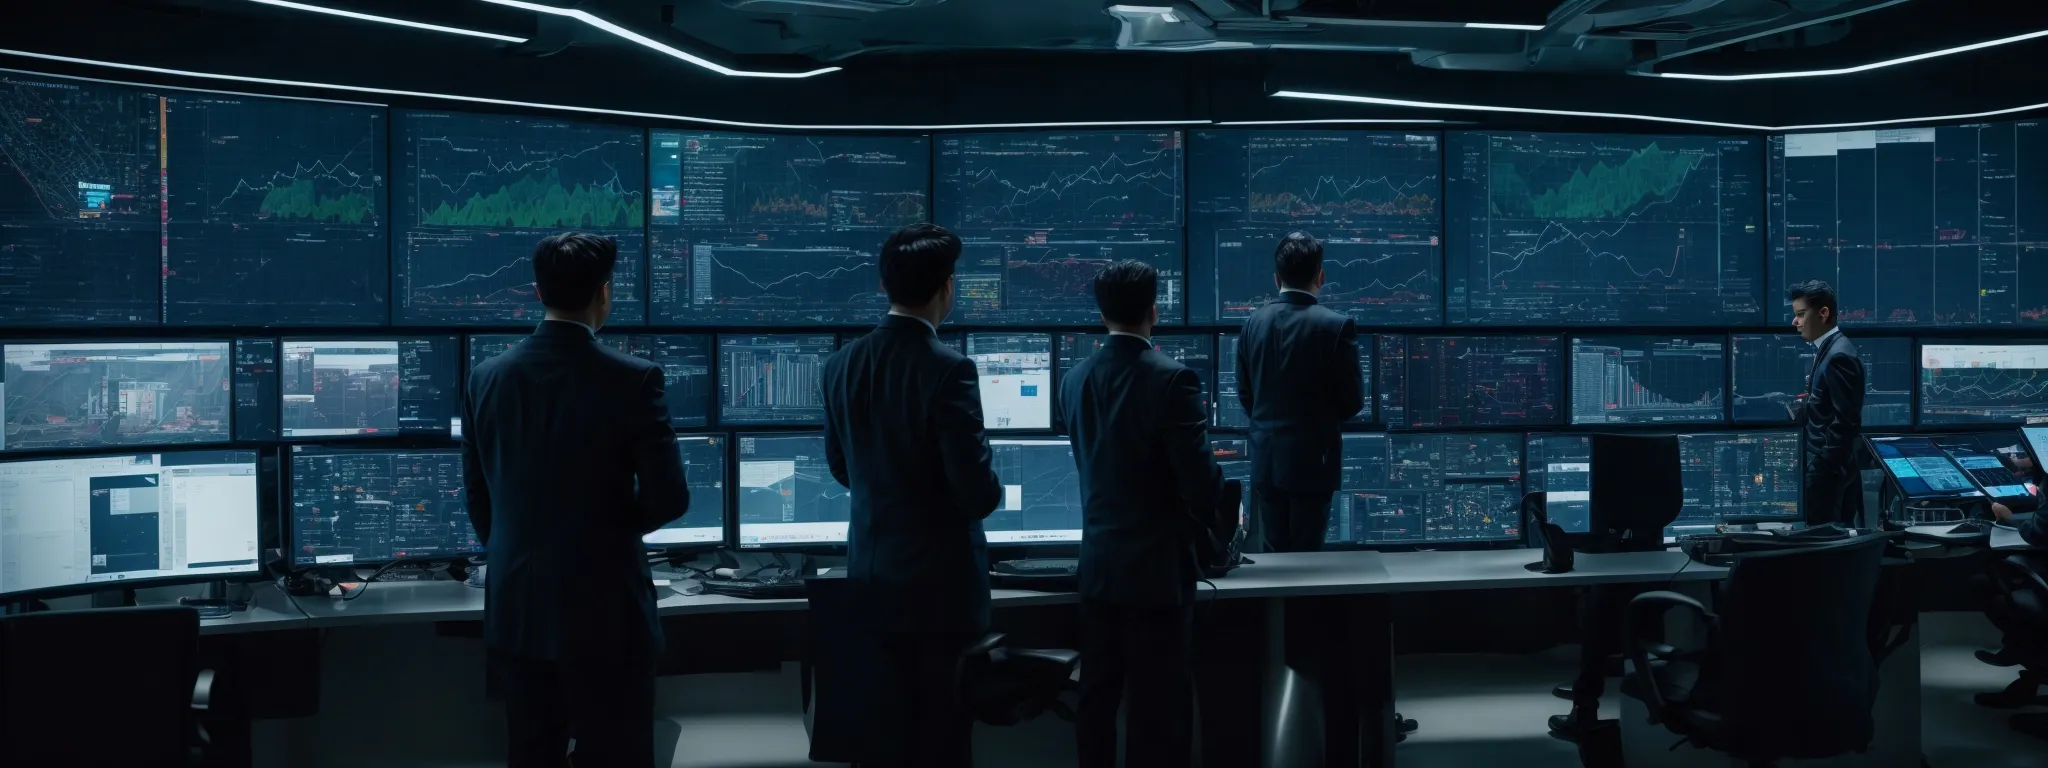 a futuristic command center with individuals monitoring seo analytics on large screens, symbolizing conductor's innovative front in tech growth.